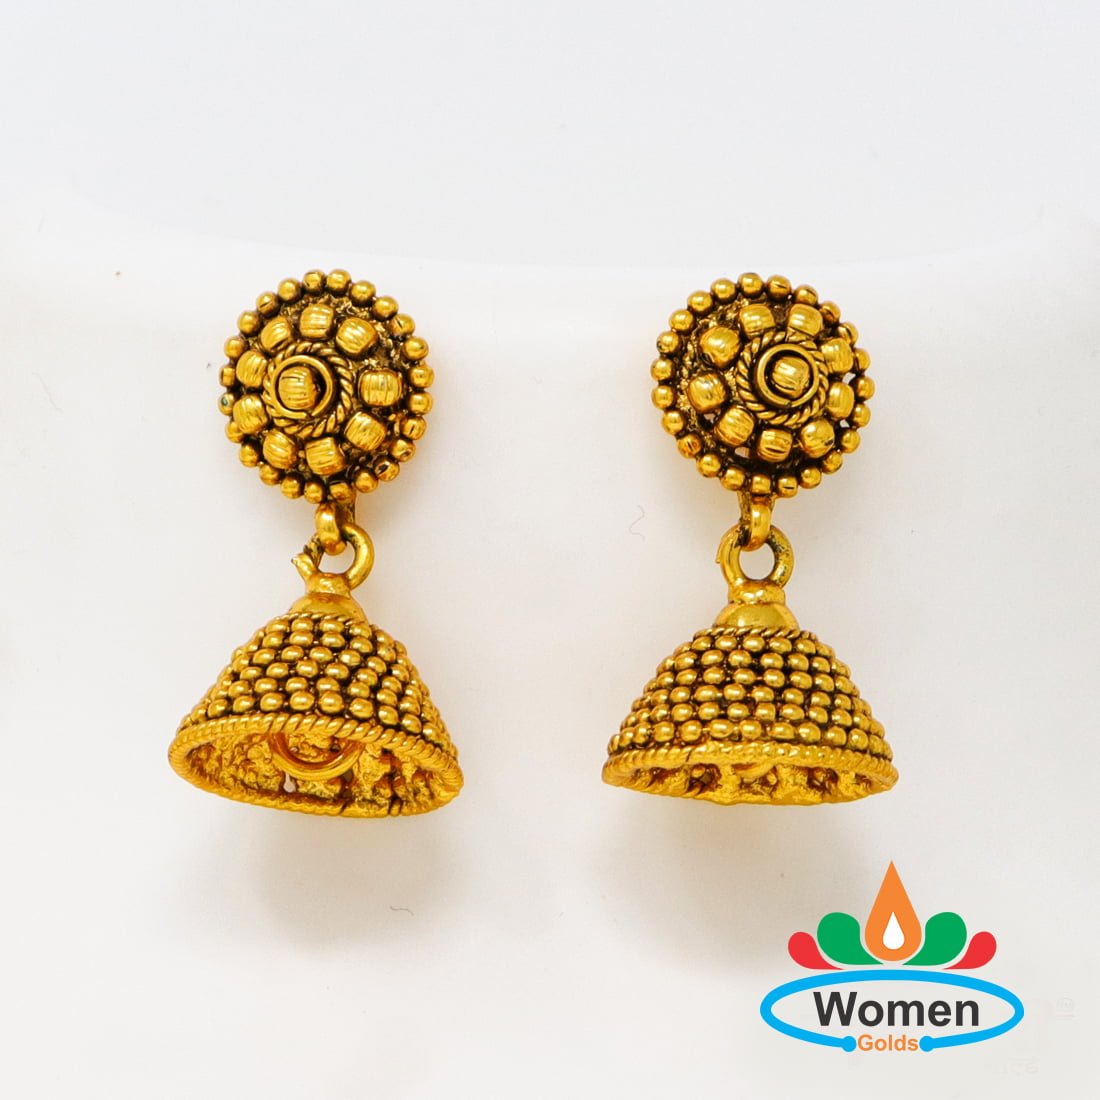 Buy Cute Light Weight Gold Design Baby Girl Earrings Gold Forming Jewellery